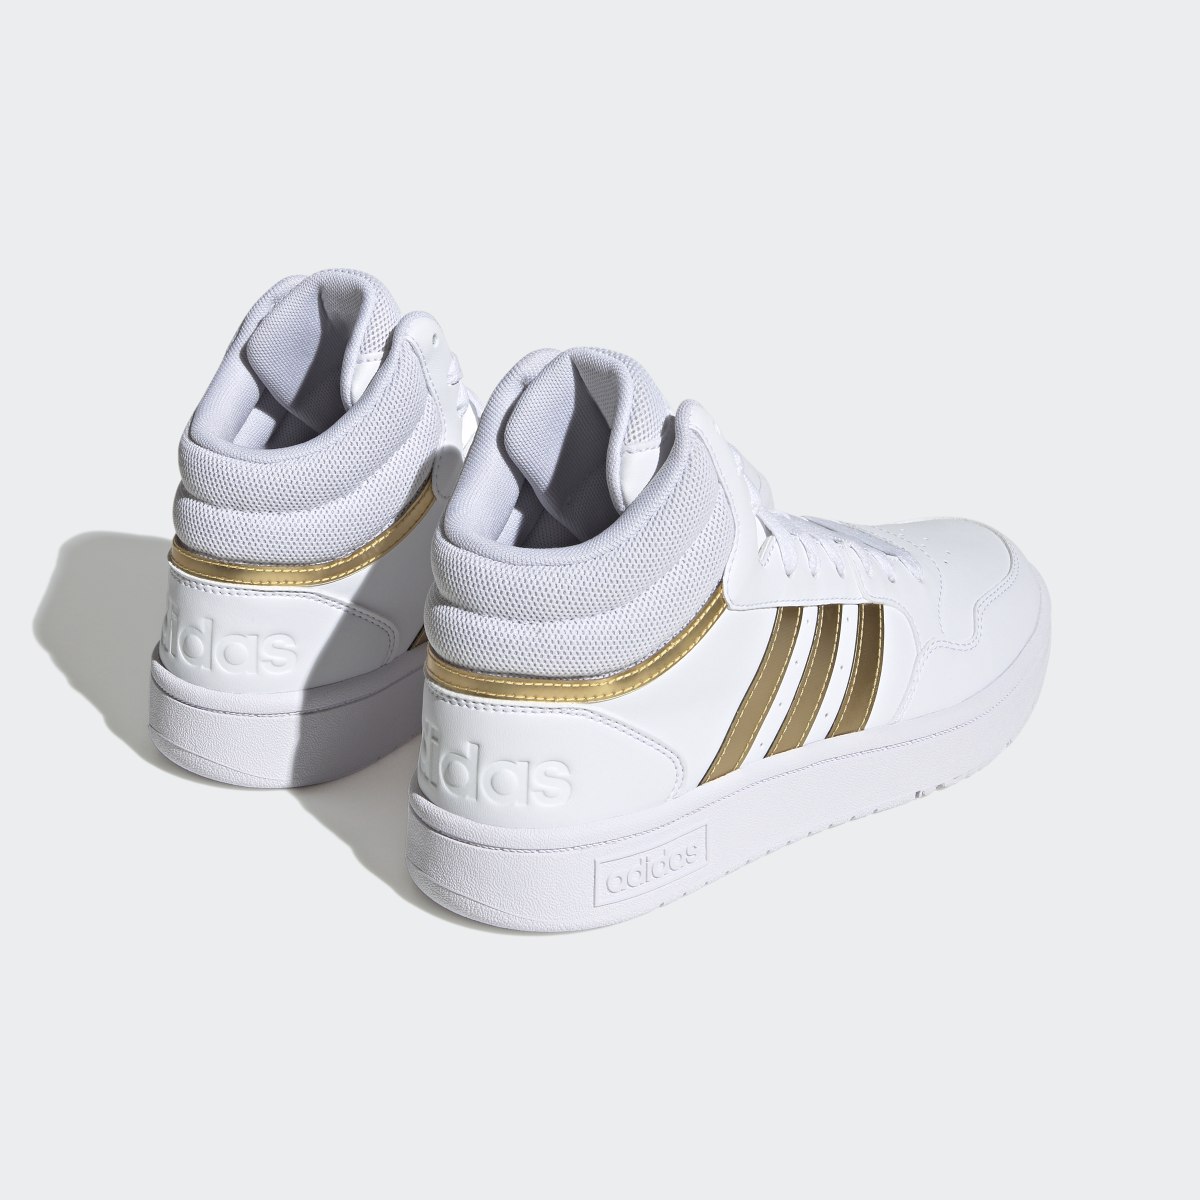 Adidas Hoops 3.0 Mid Lifestyle Basketball Classic Shoes. 6